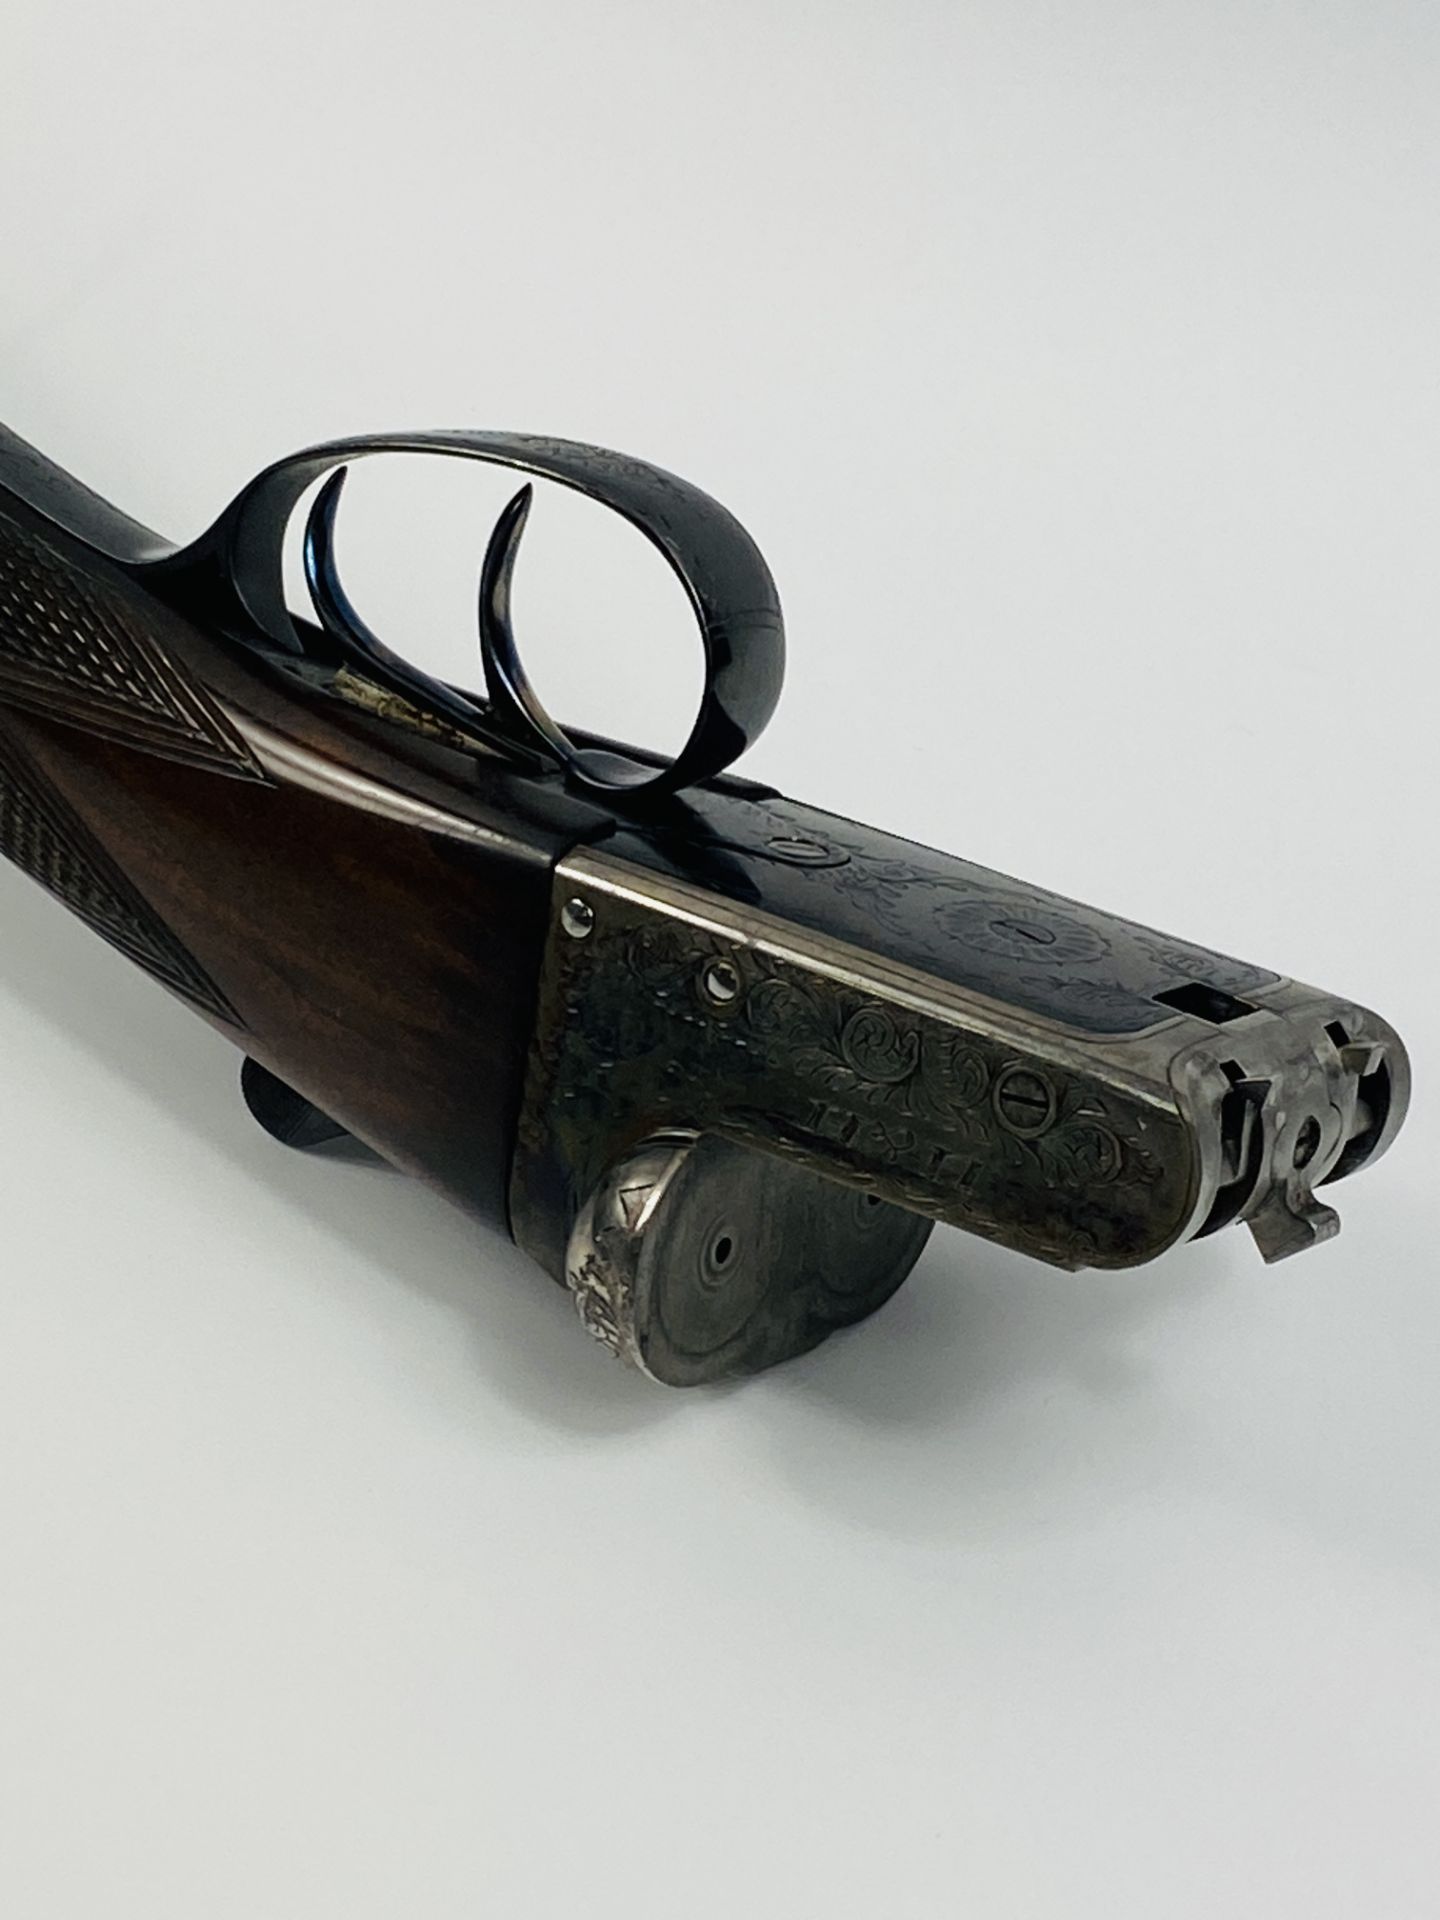 Holland & Holland 12 bore boxlock ejector shotgun in Holland & Holland case. - Image 23 of 24